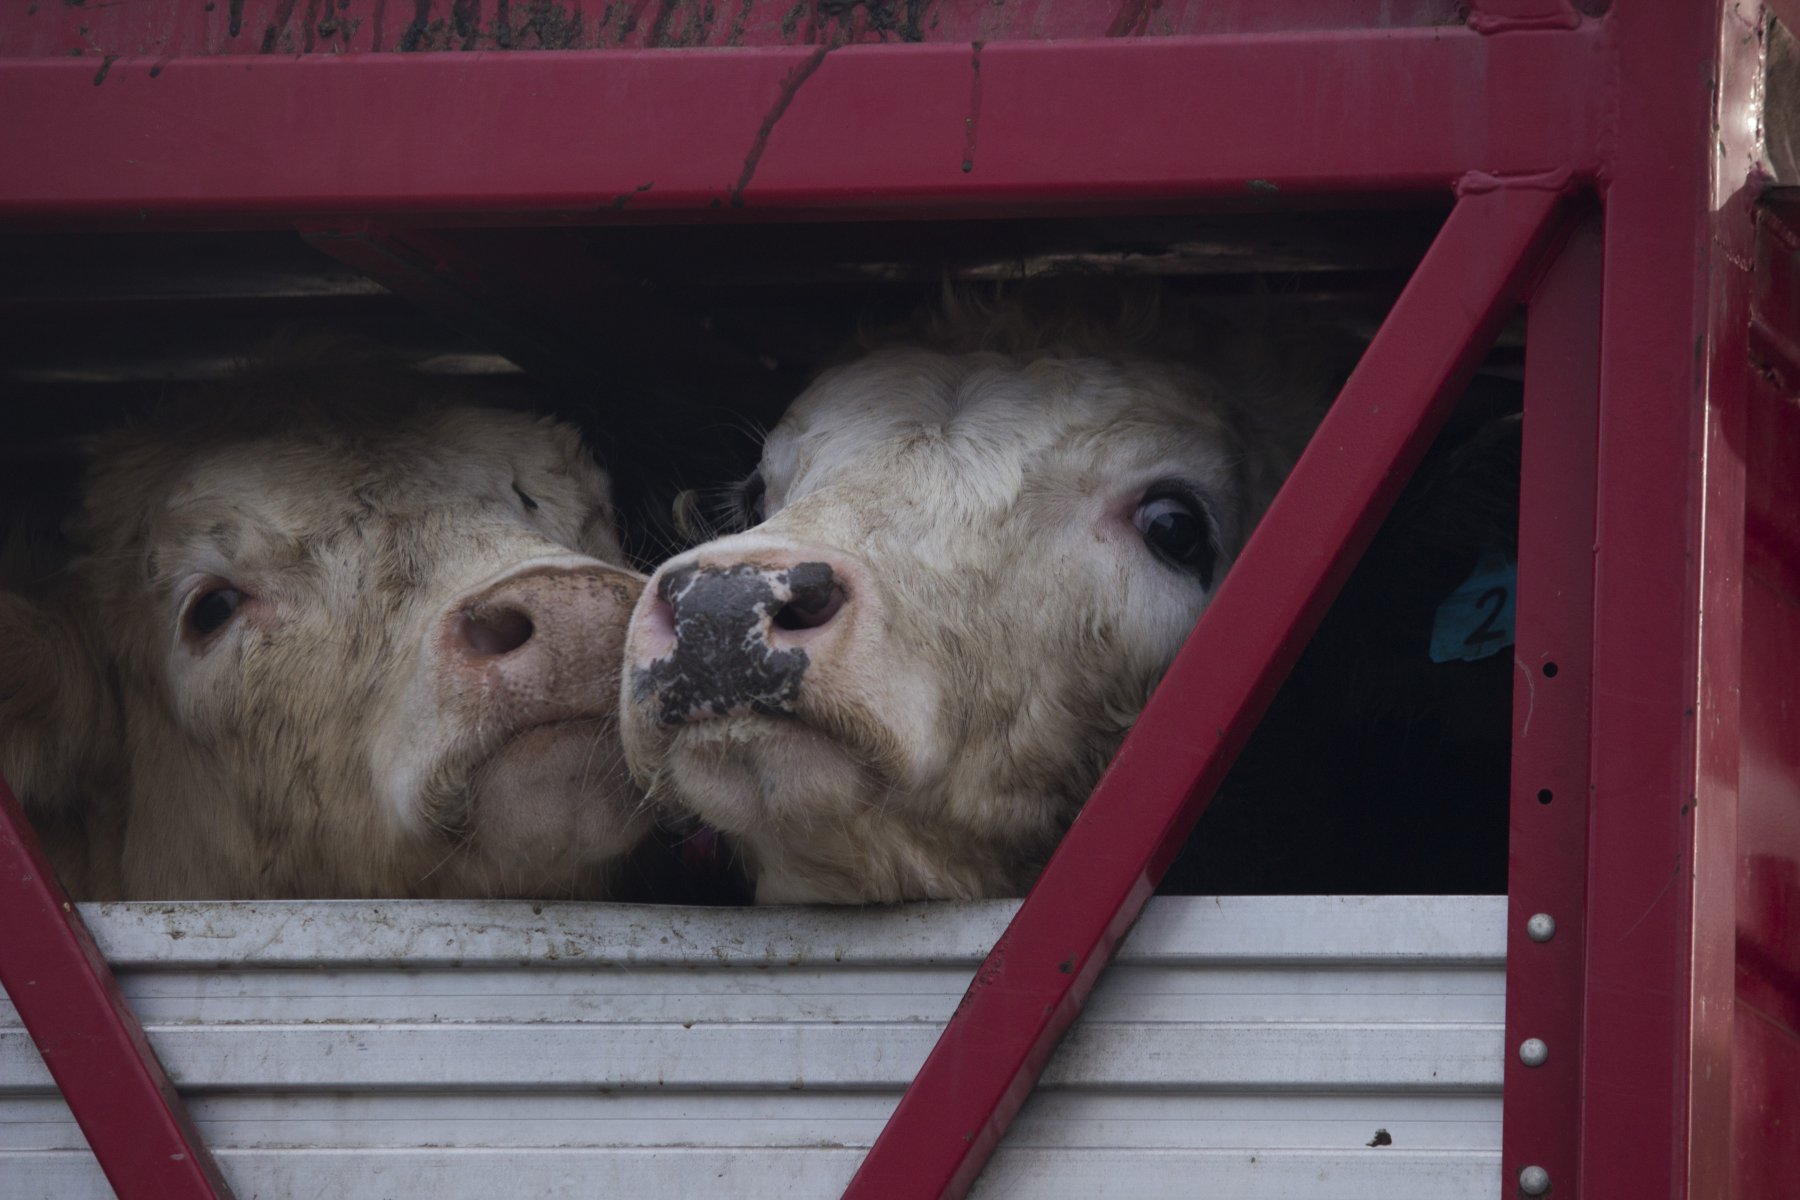 Cows and Human Crew Lost at Sea in ‘Gulf Livestock 1’ Tragedy